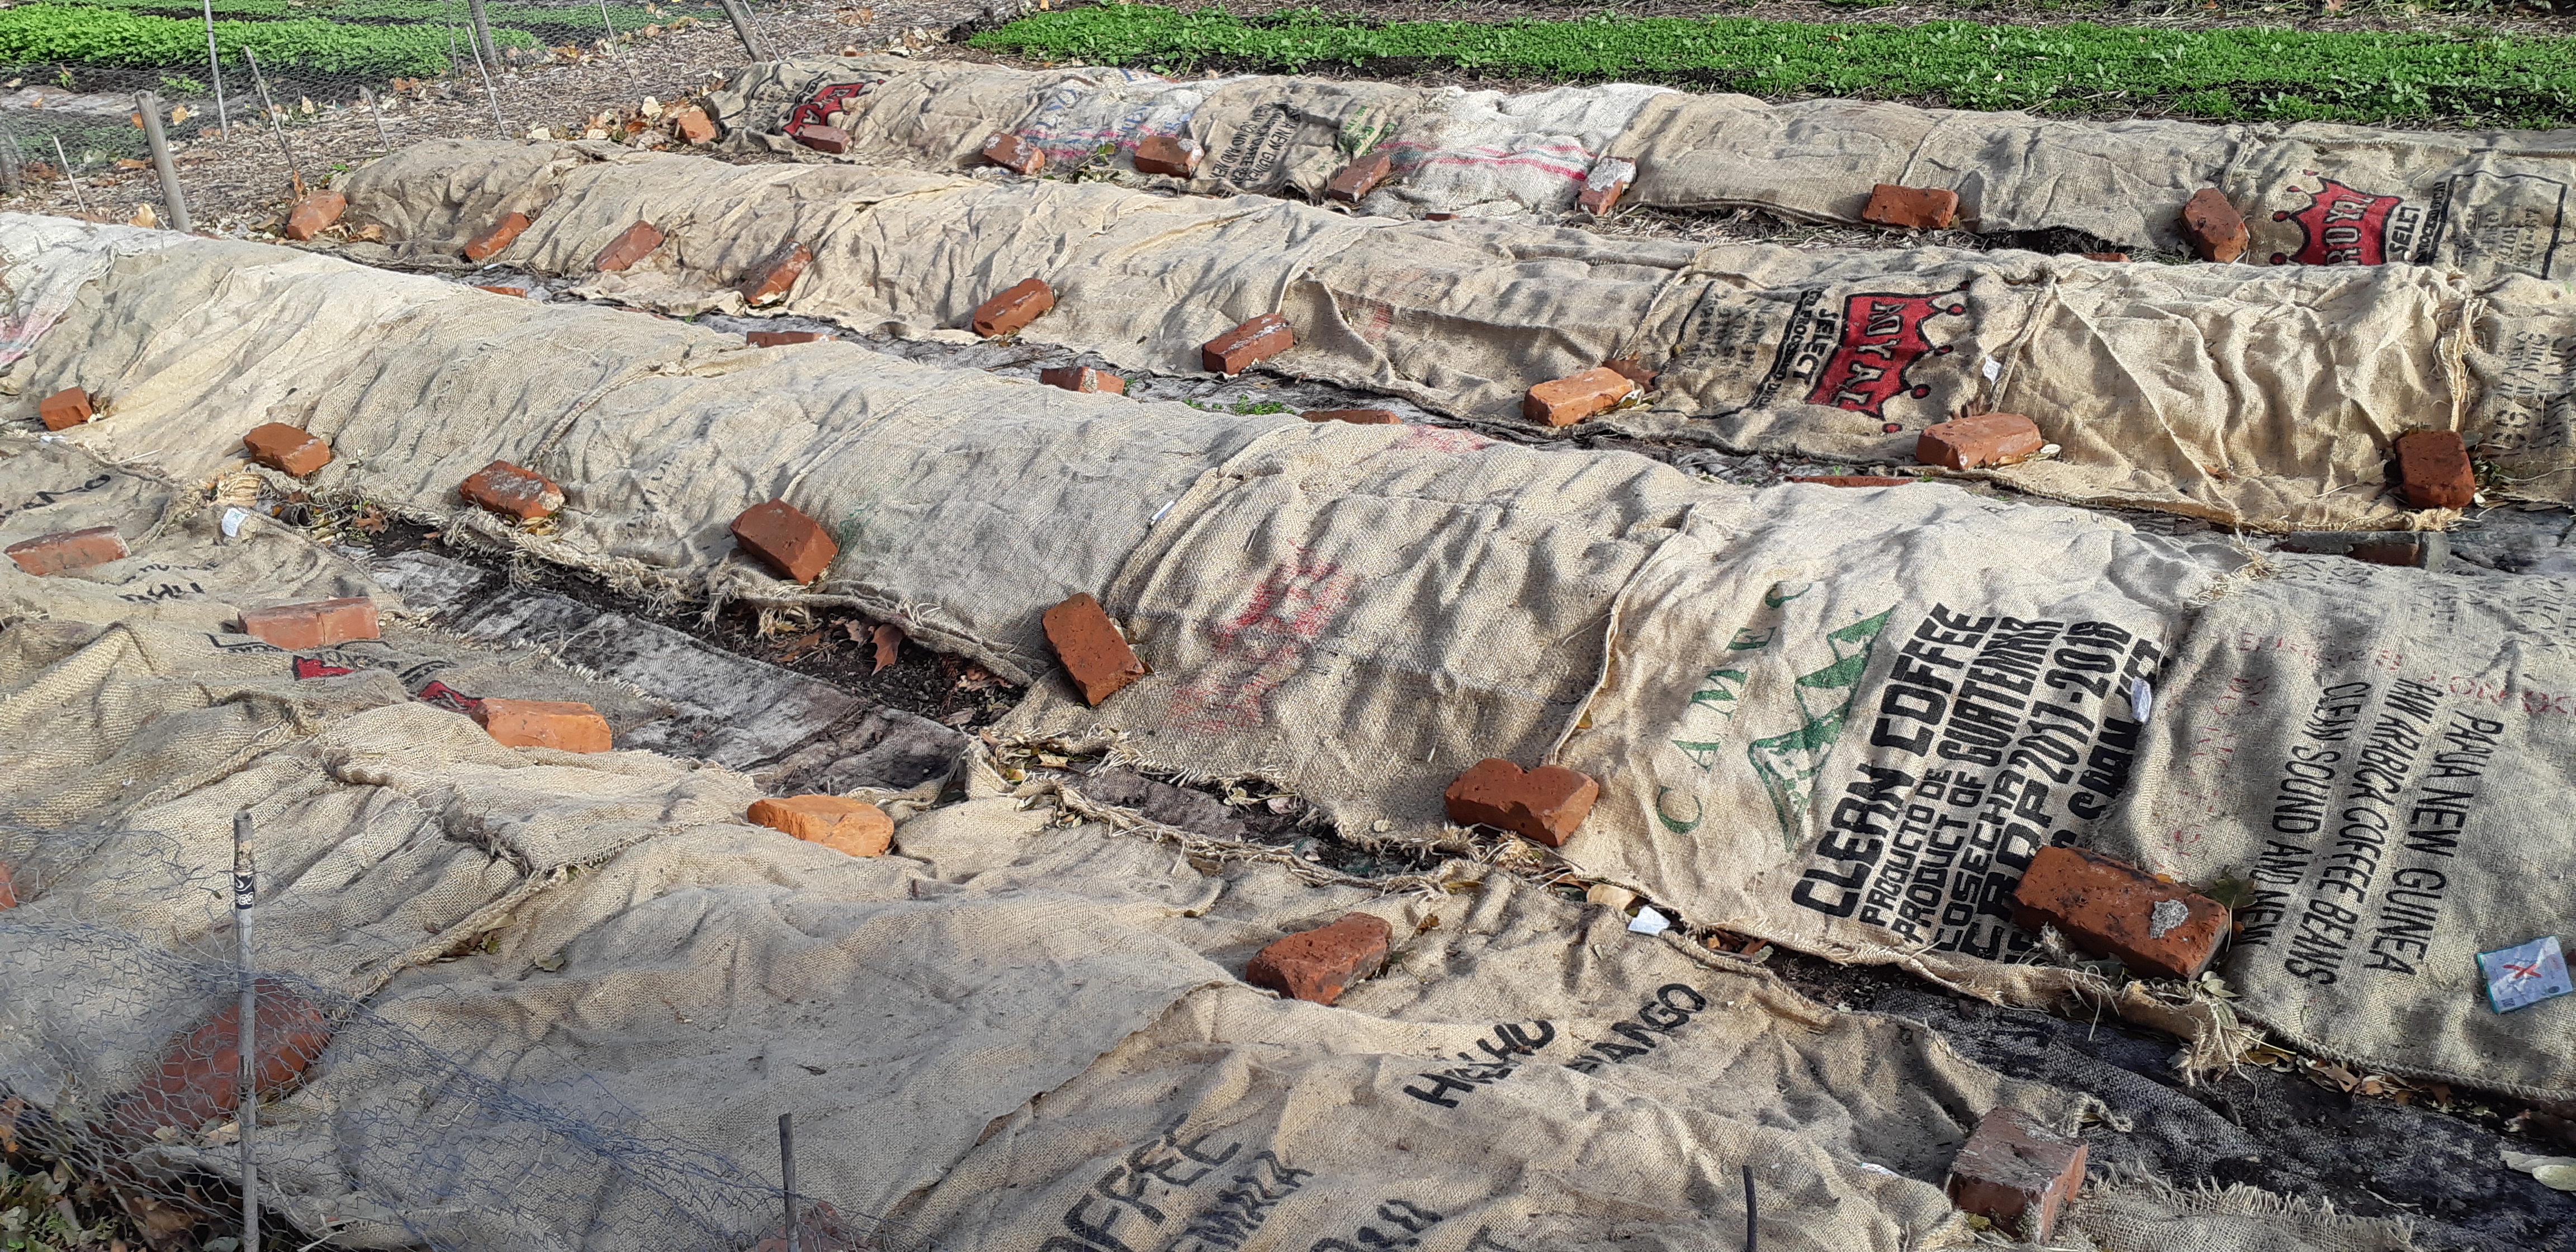 Leaves mounded on vegetable beds, covered with burlap and secured at the edges. A good method for protecting strawberries, garlic and tender perennials over winter.